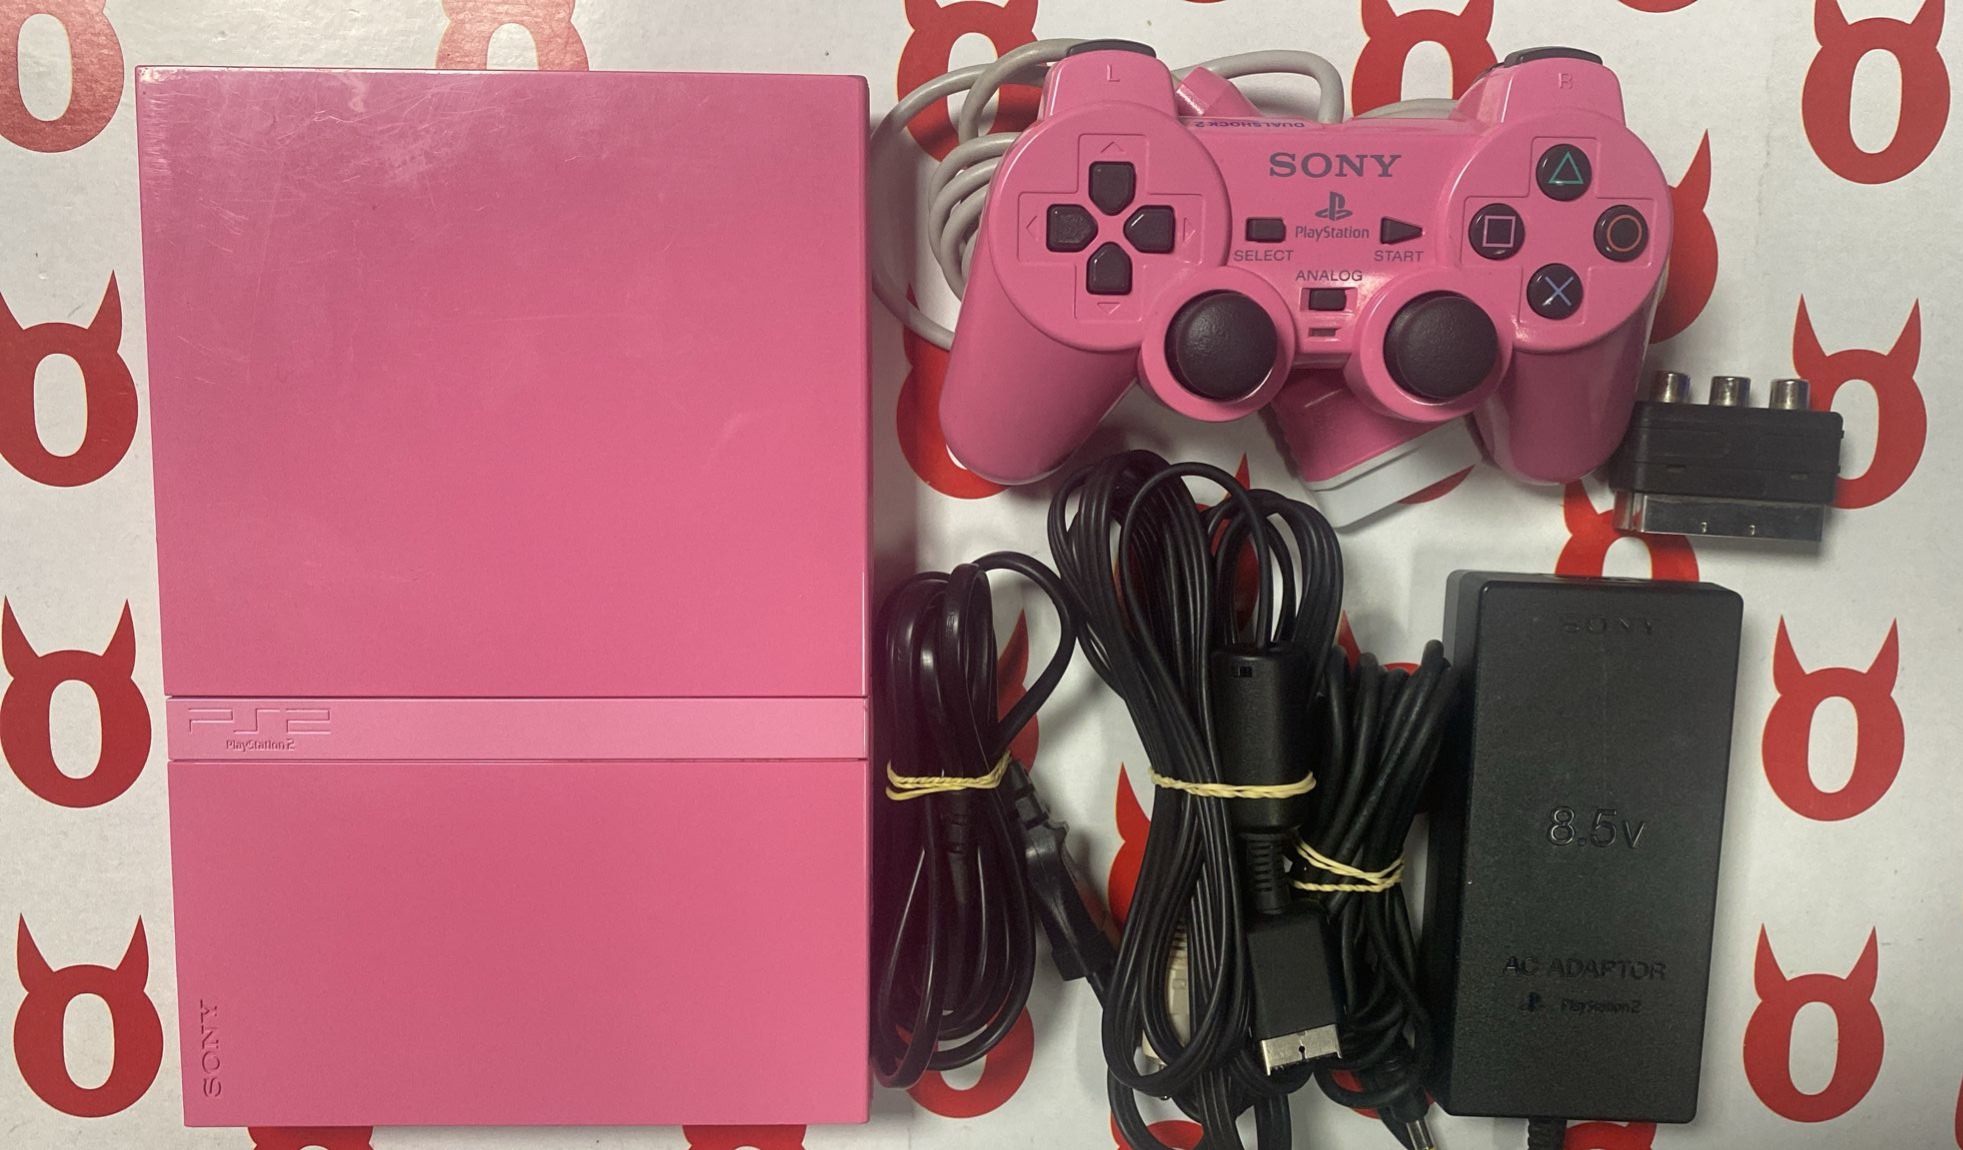 PS2 CONSOLE PS2 / SLIM / ROSE + MANETTE / SONY / ROSE